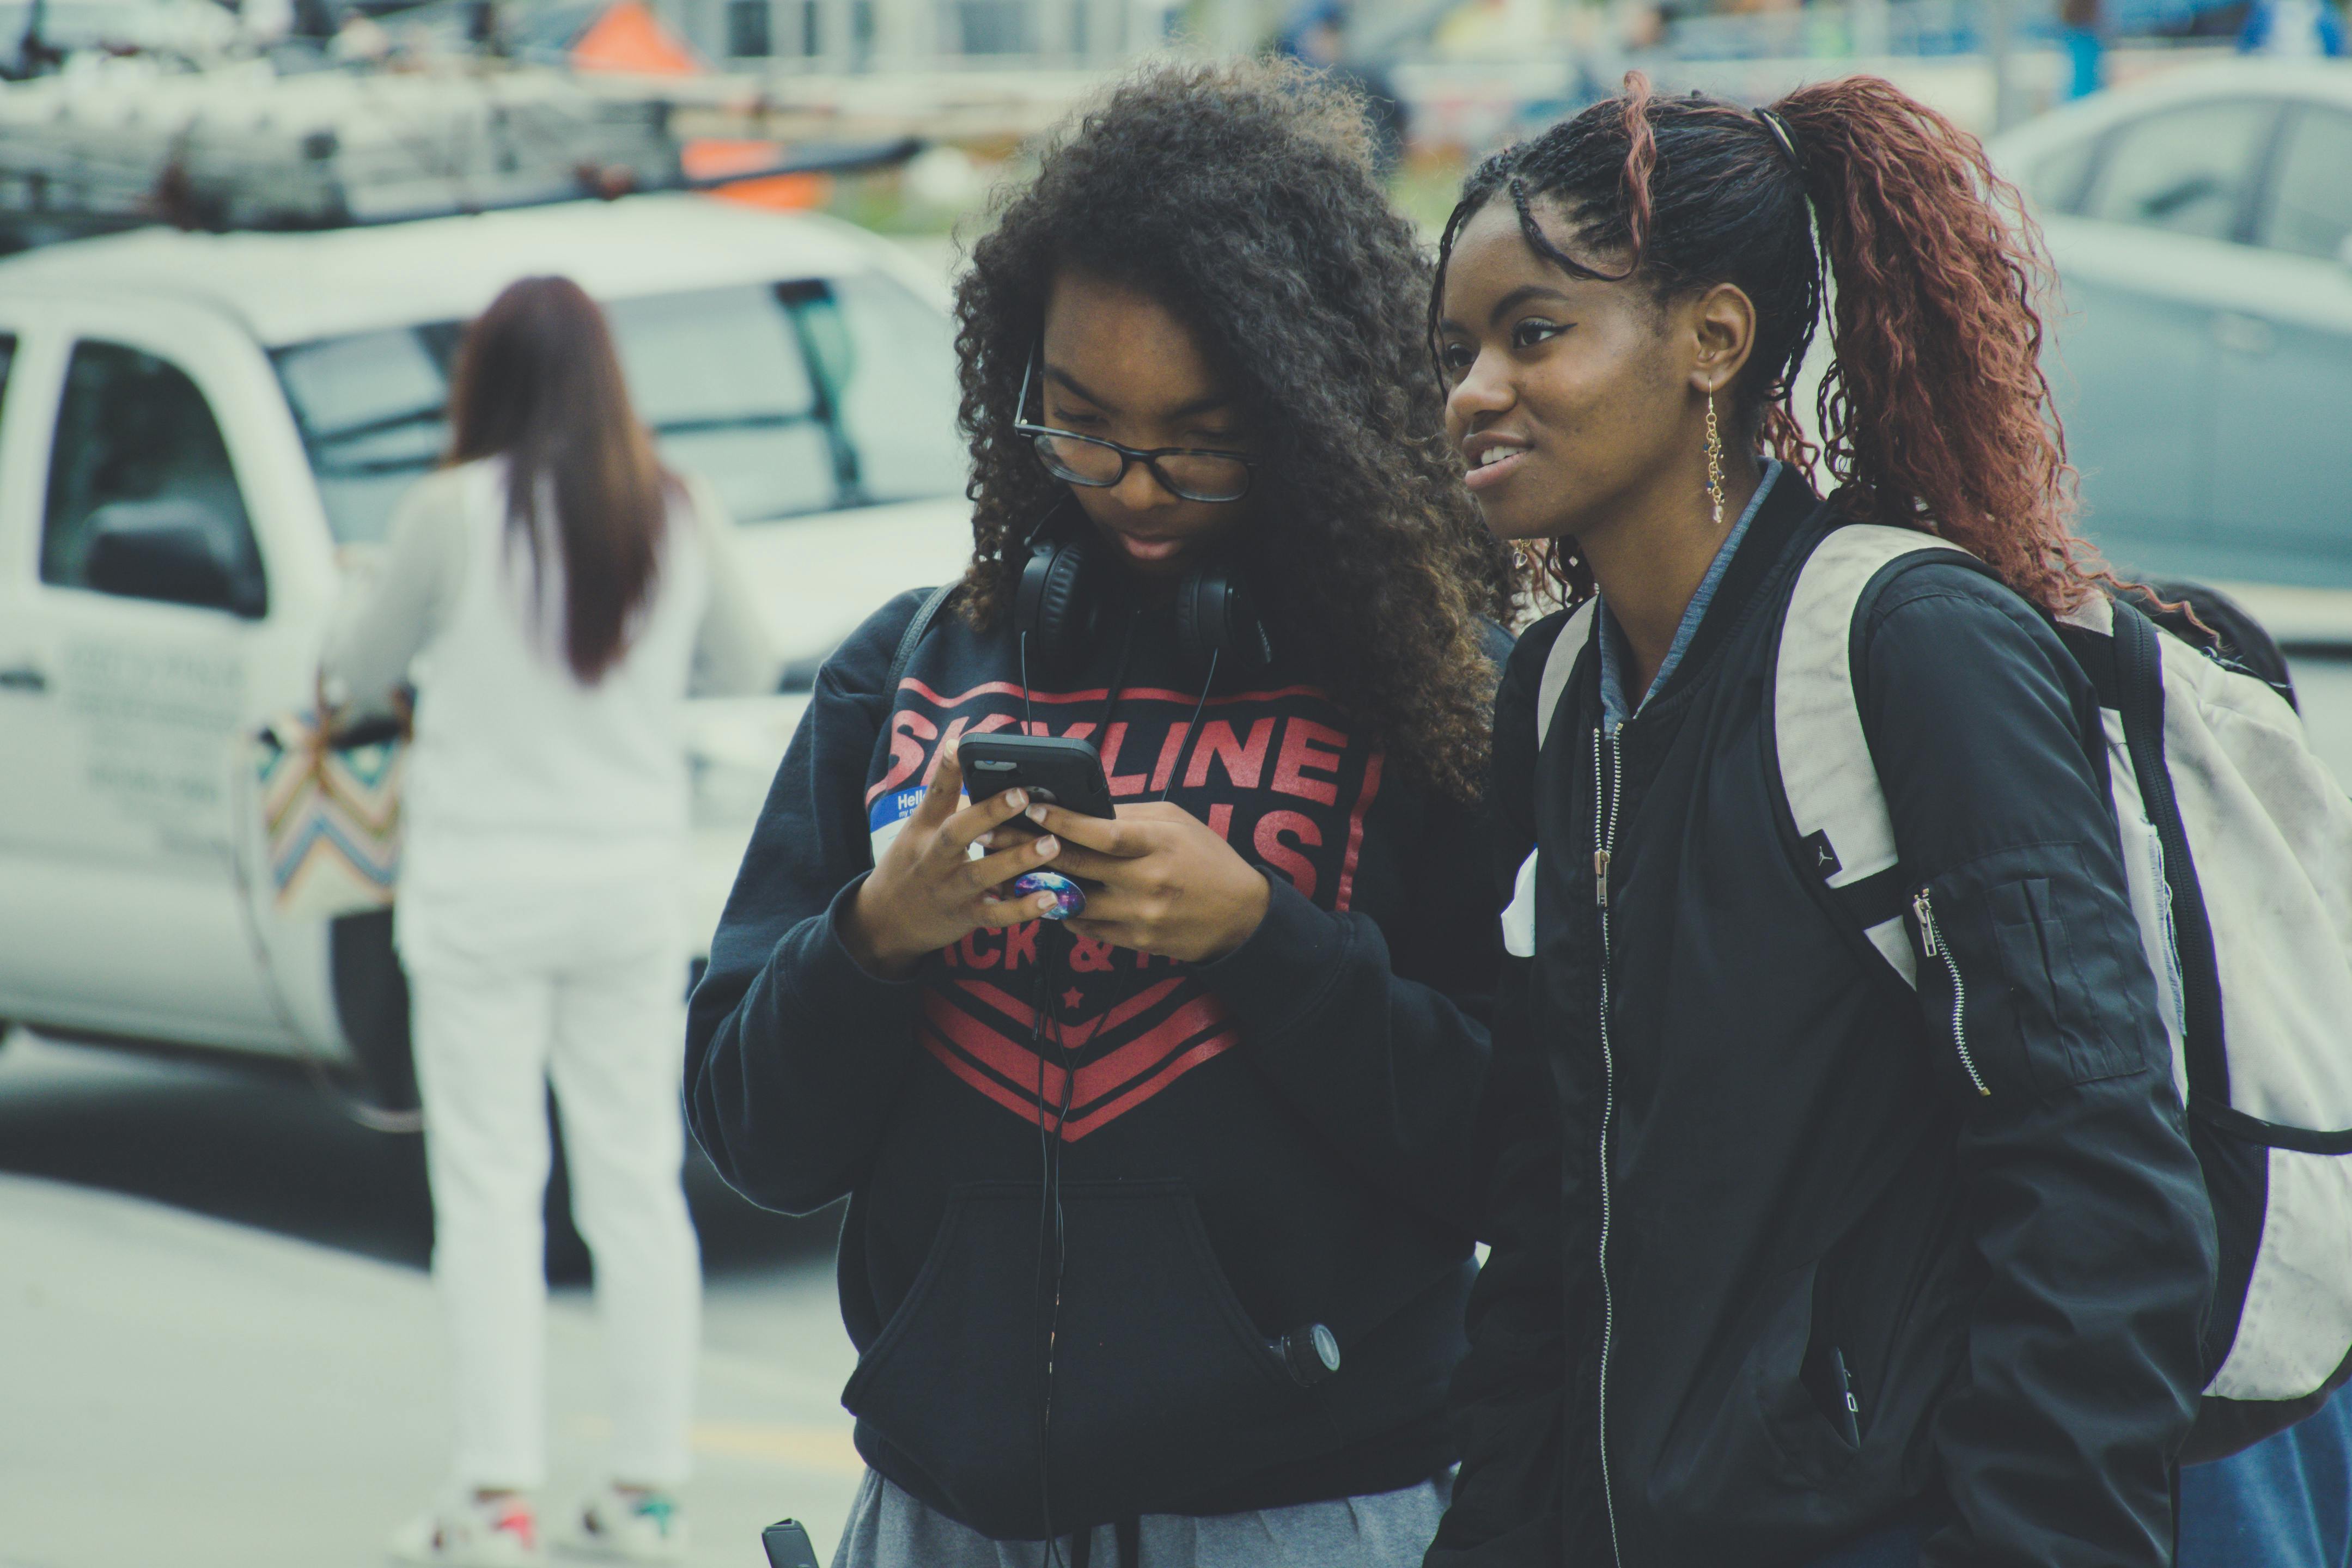 Two girls standing outside together; one girl wears a backpack and the other holds a cell phone